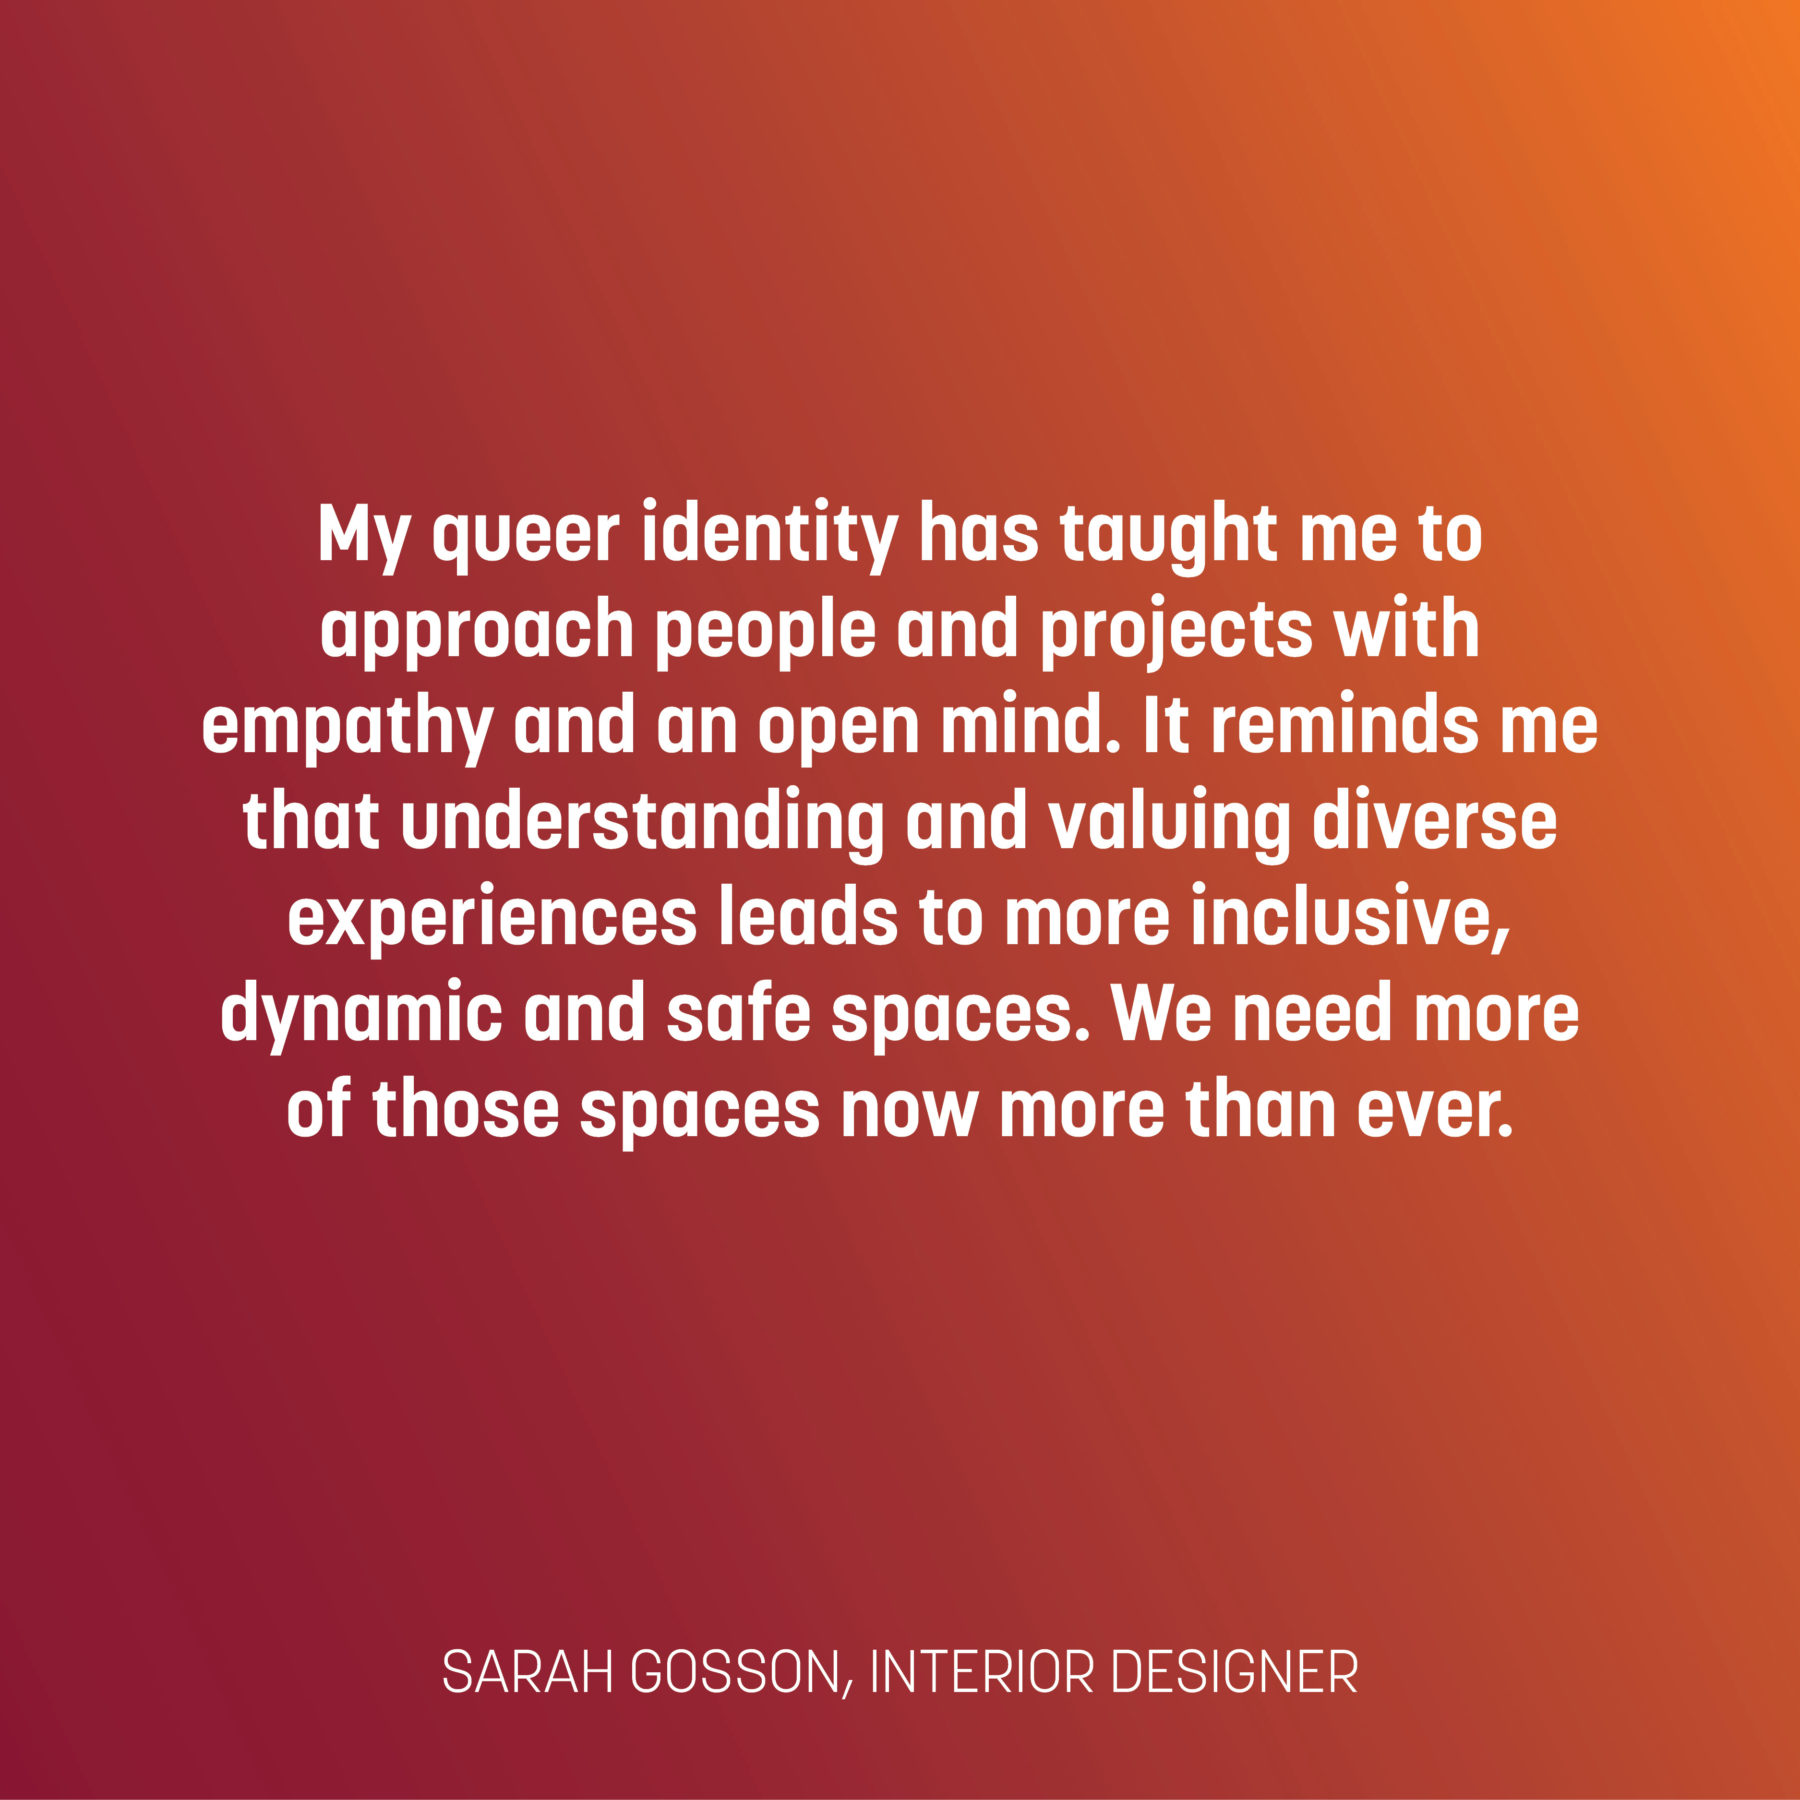 Text on a red and orange gradient reads: My queer identity has taught me to approach people and projects with empathy and an open mind. It reminds me that understanding and valuing diverse experiences leads to more inclusive, dynamic and safe spaces. We need more of those spaces now more than ever. - Sarah Gosson, interior designer